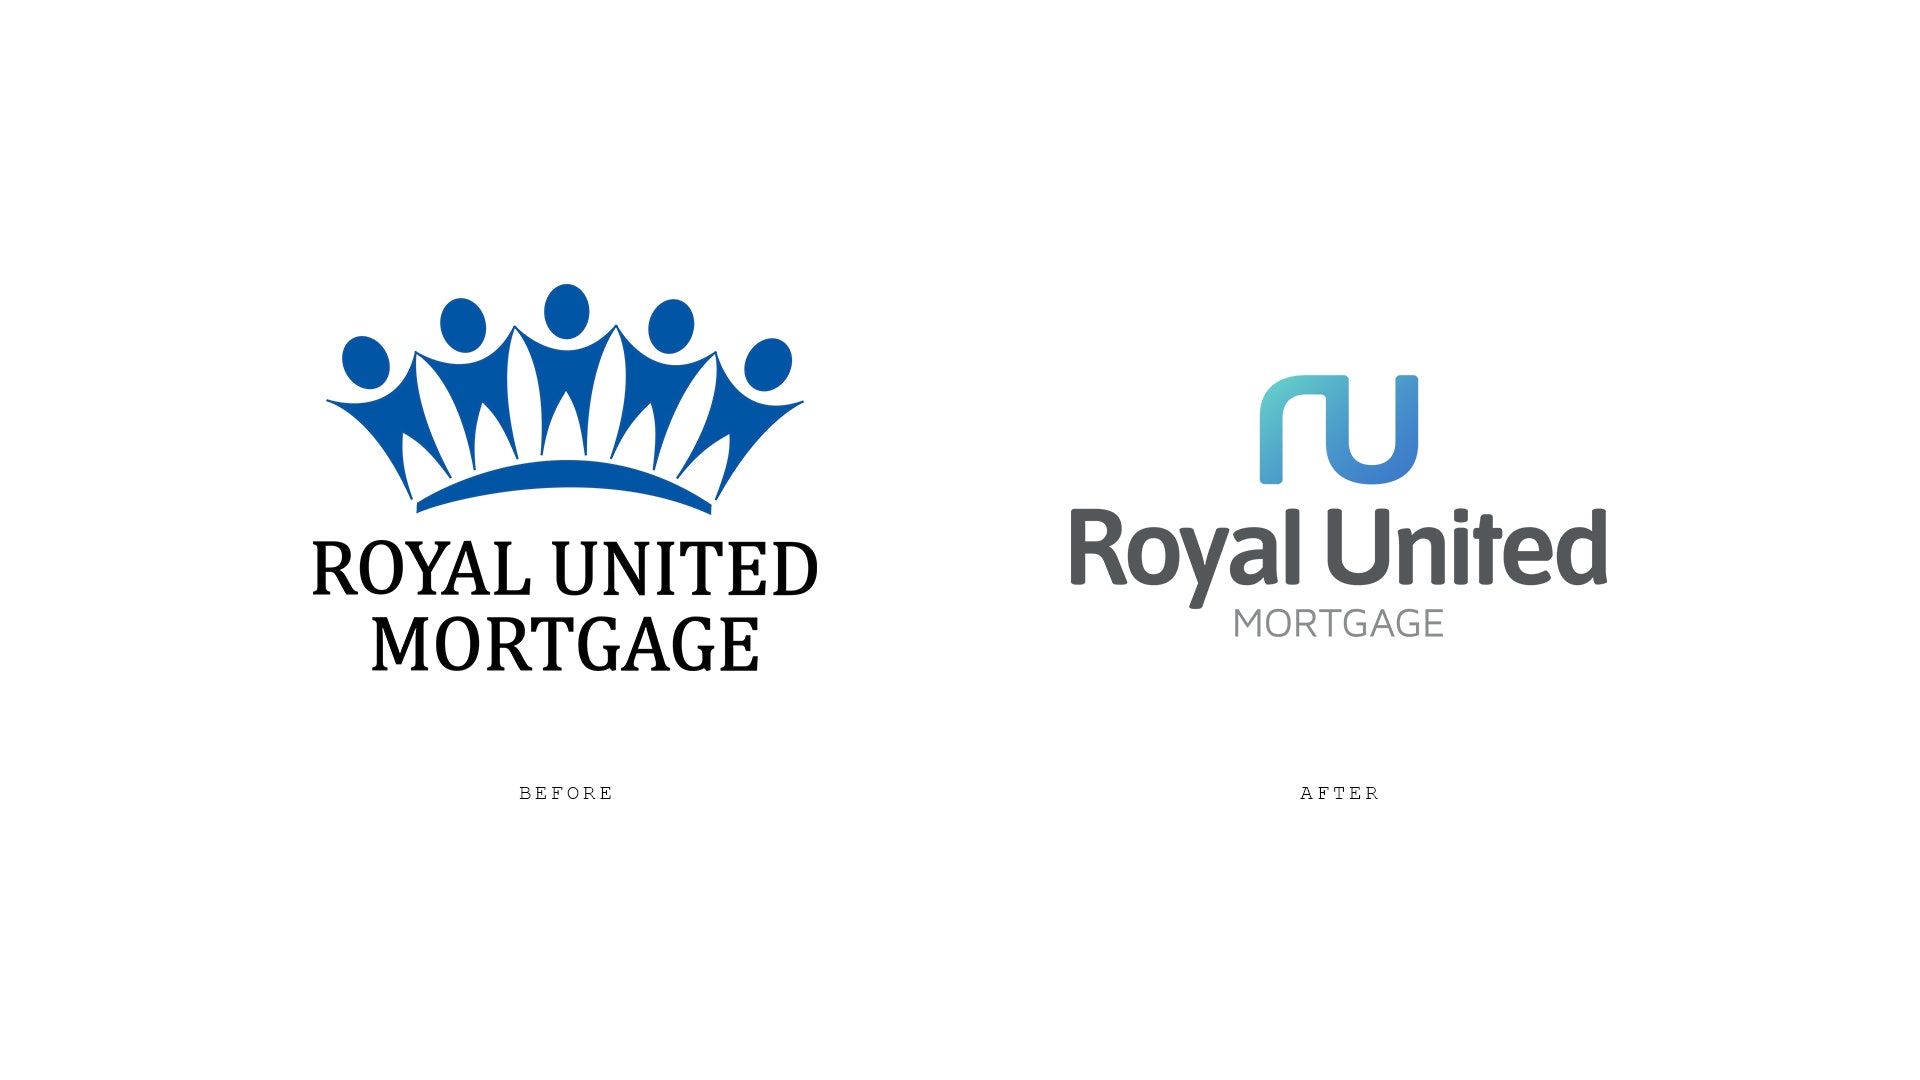 Royal United Mortgage Logo Before and After